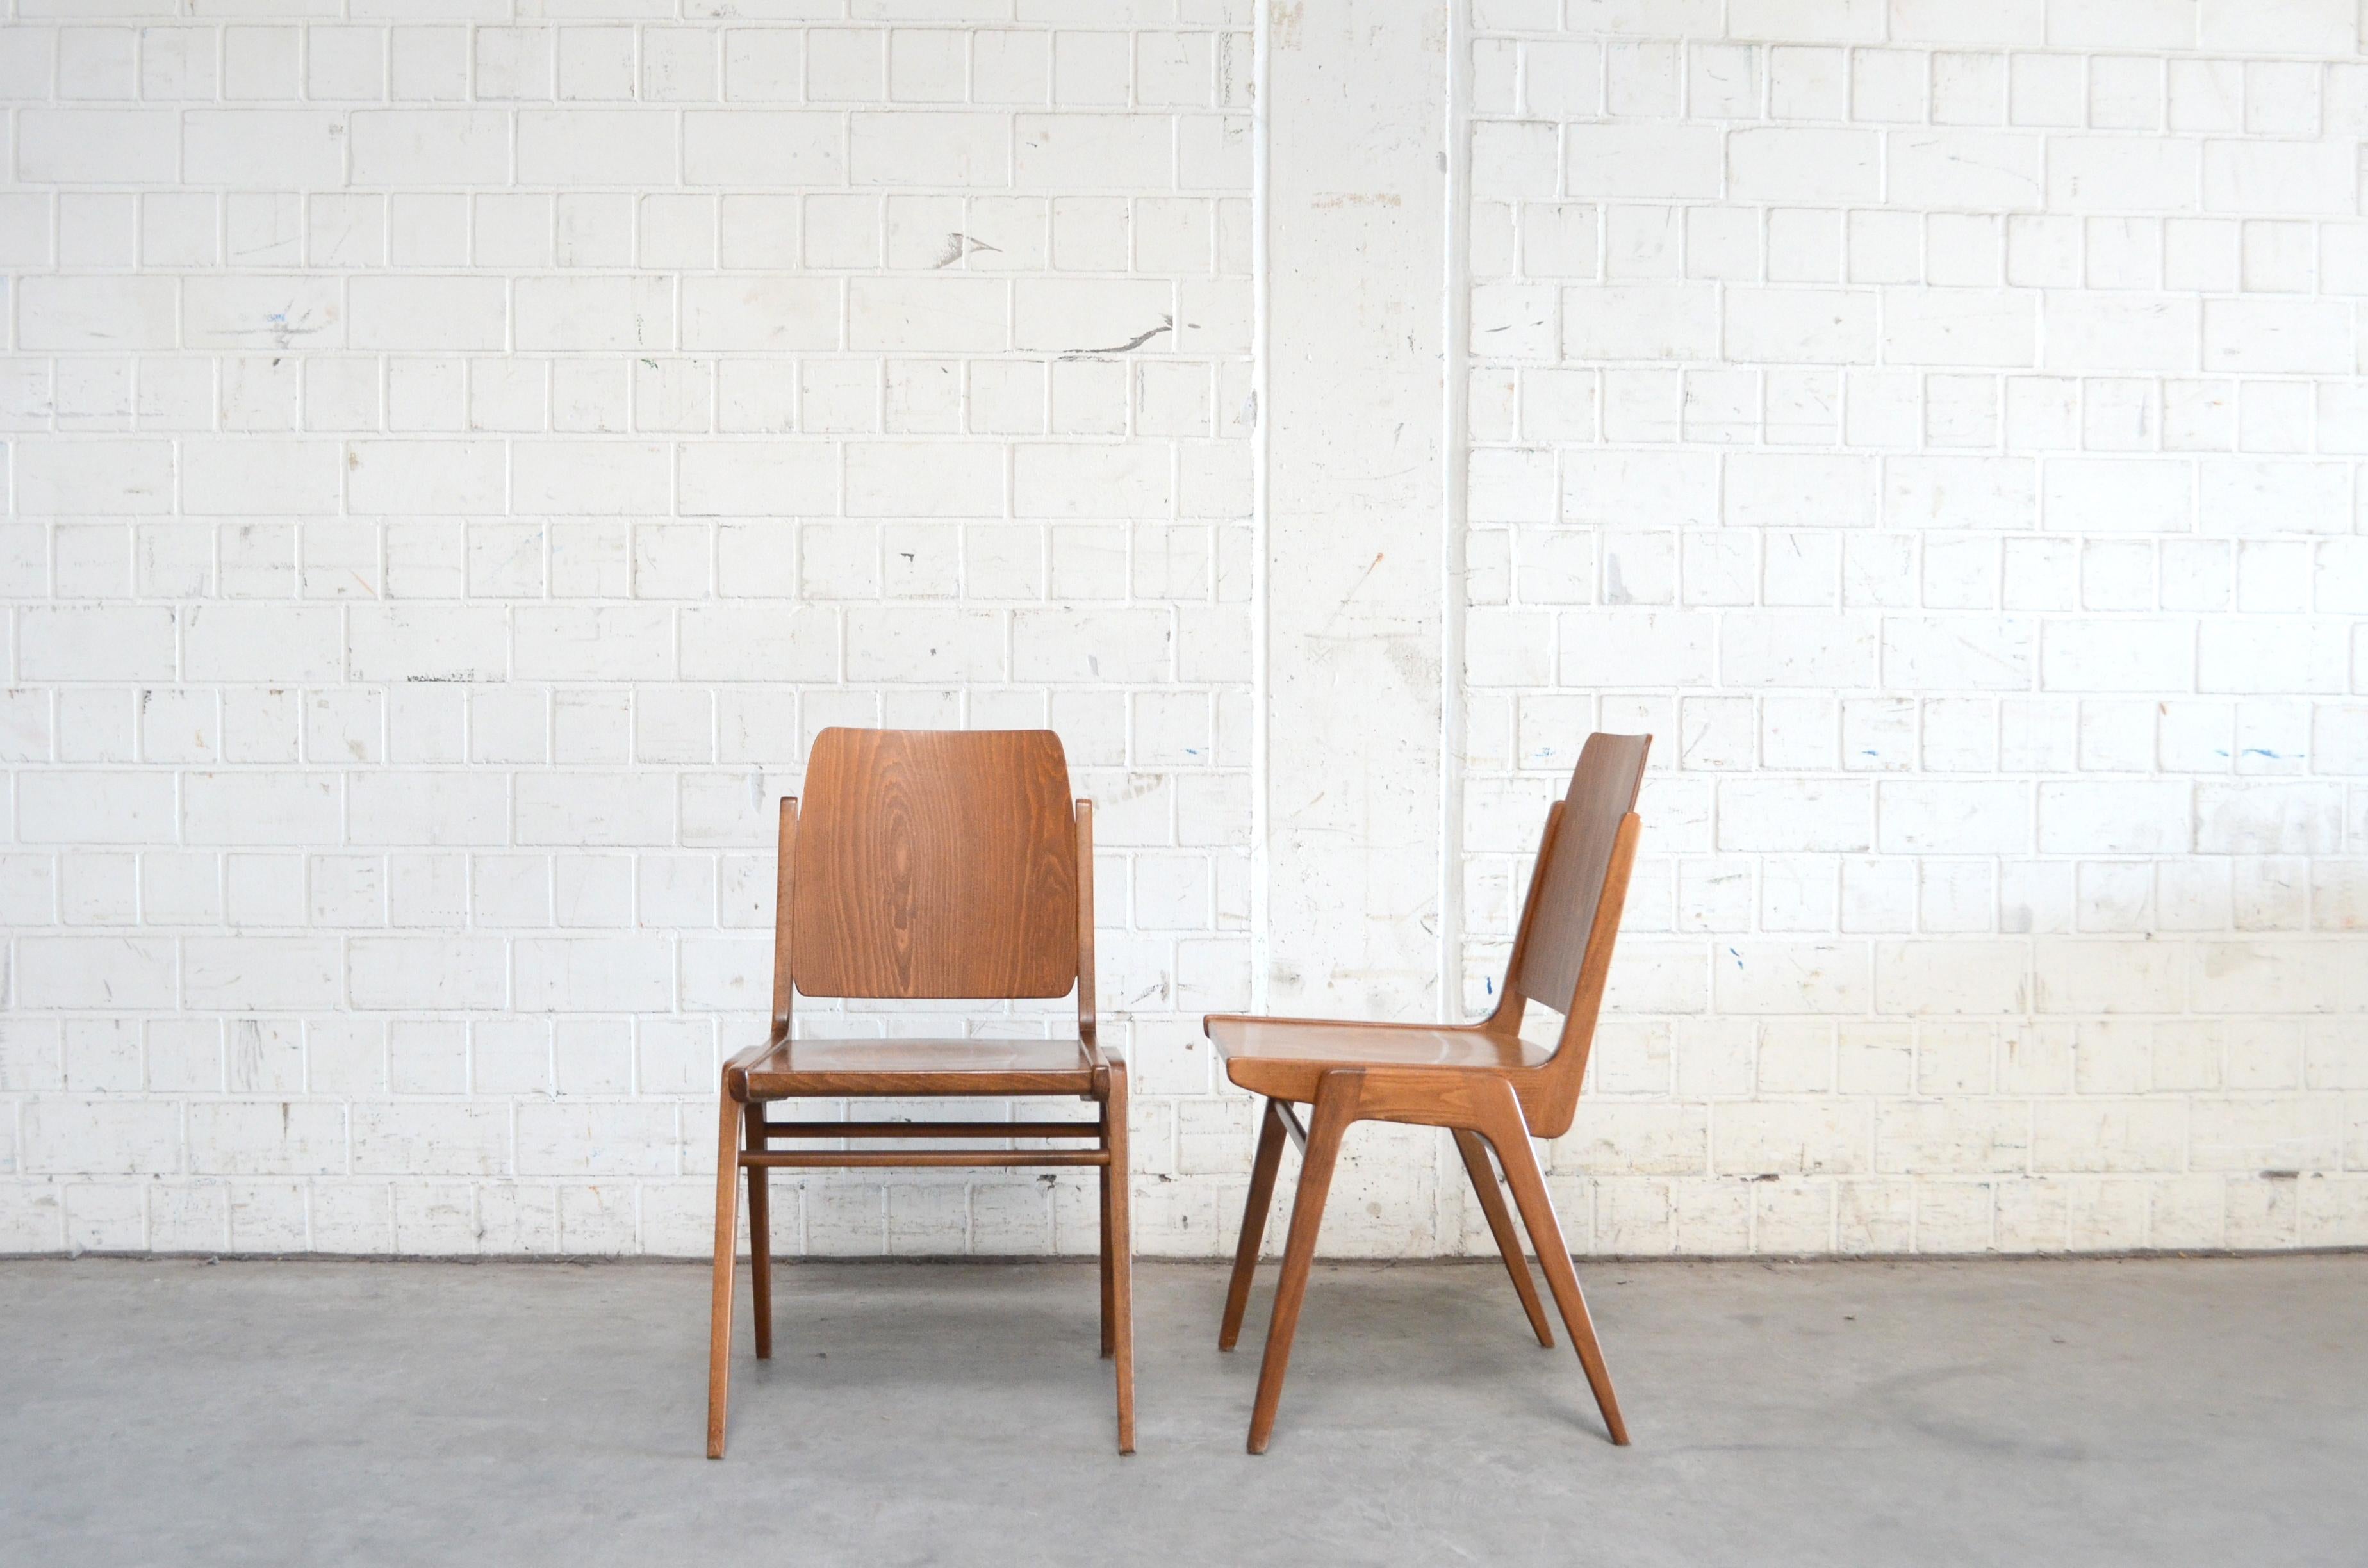 Stained 4 Set of Original Austro Chairs by Franz Schuster for Wiesner Hager Austria 1959 For Sale